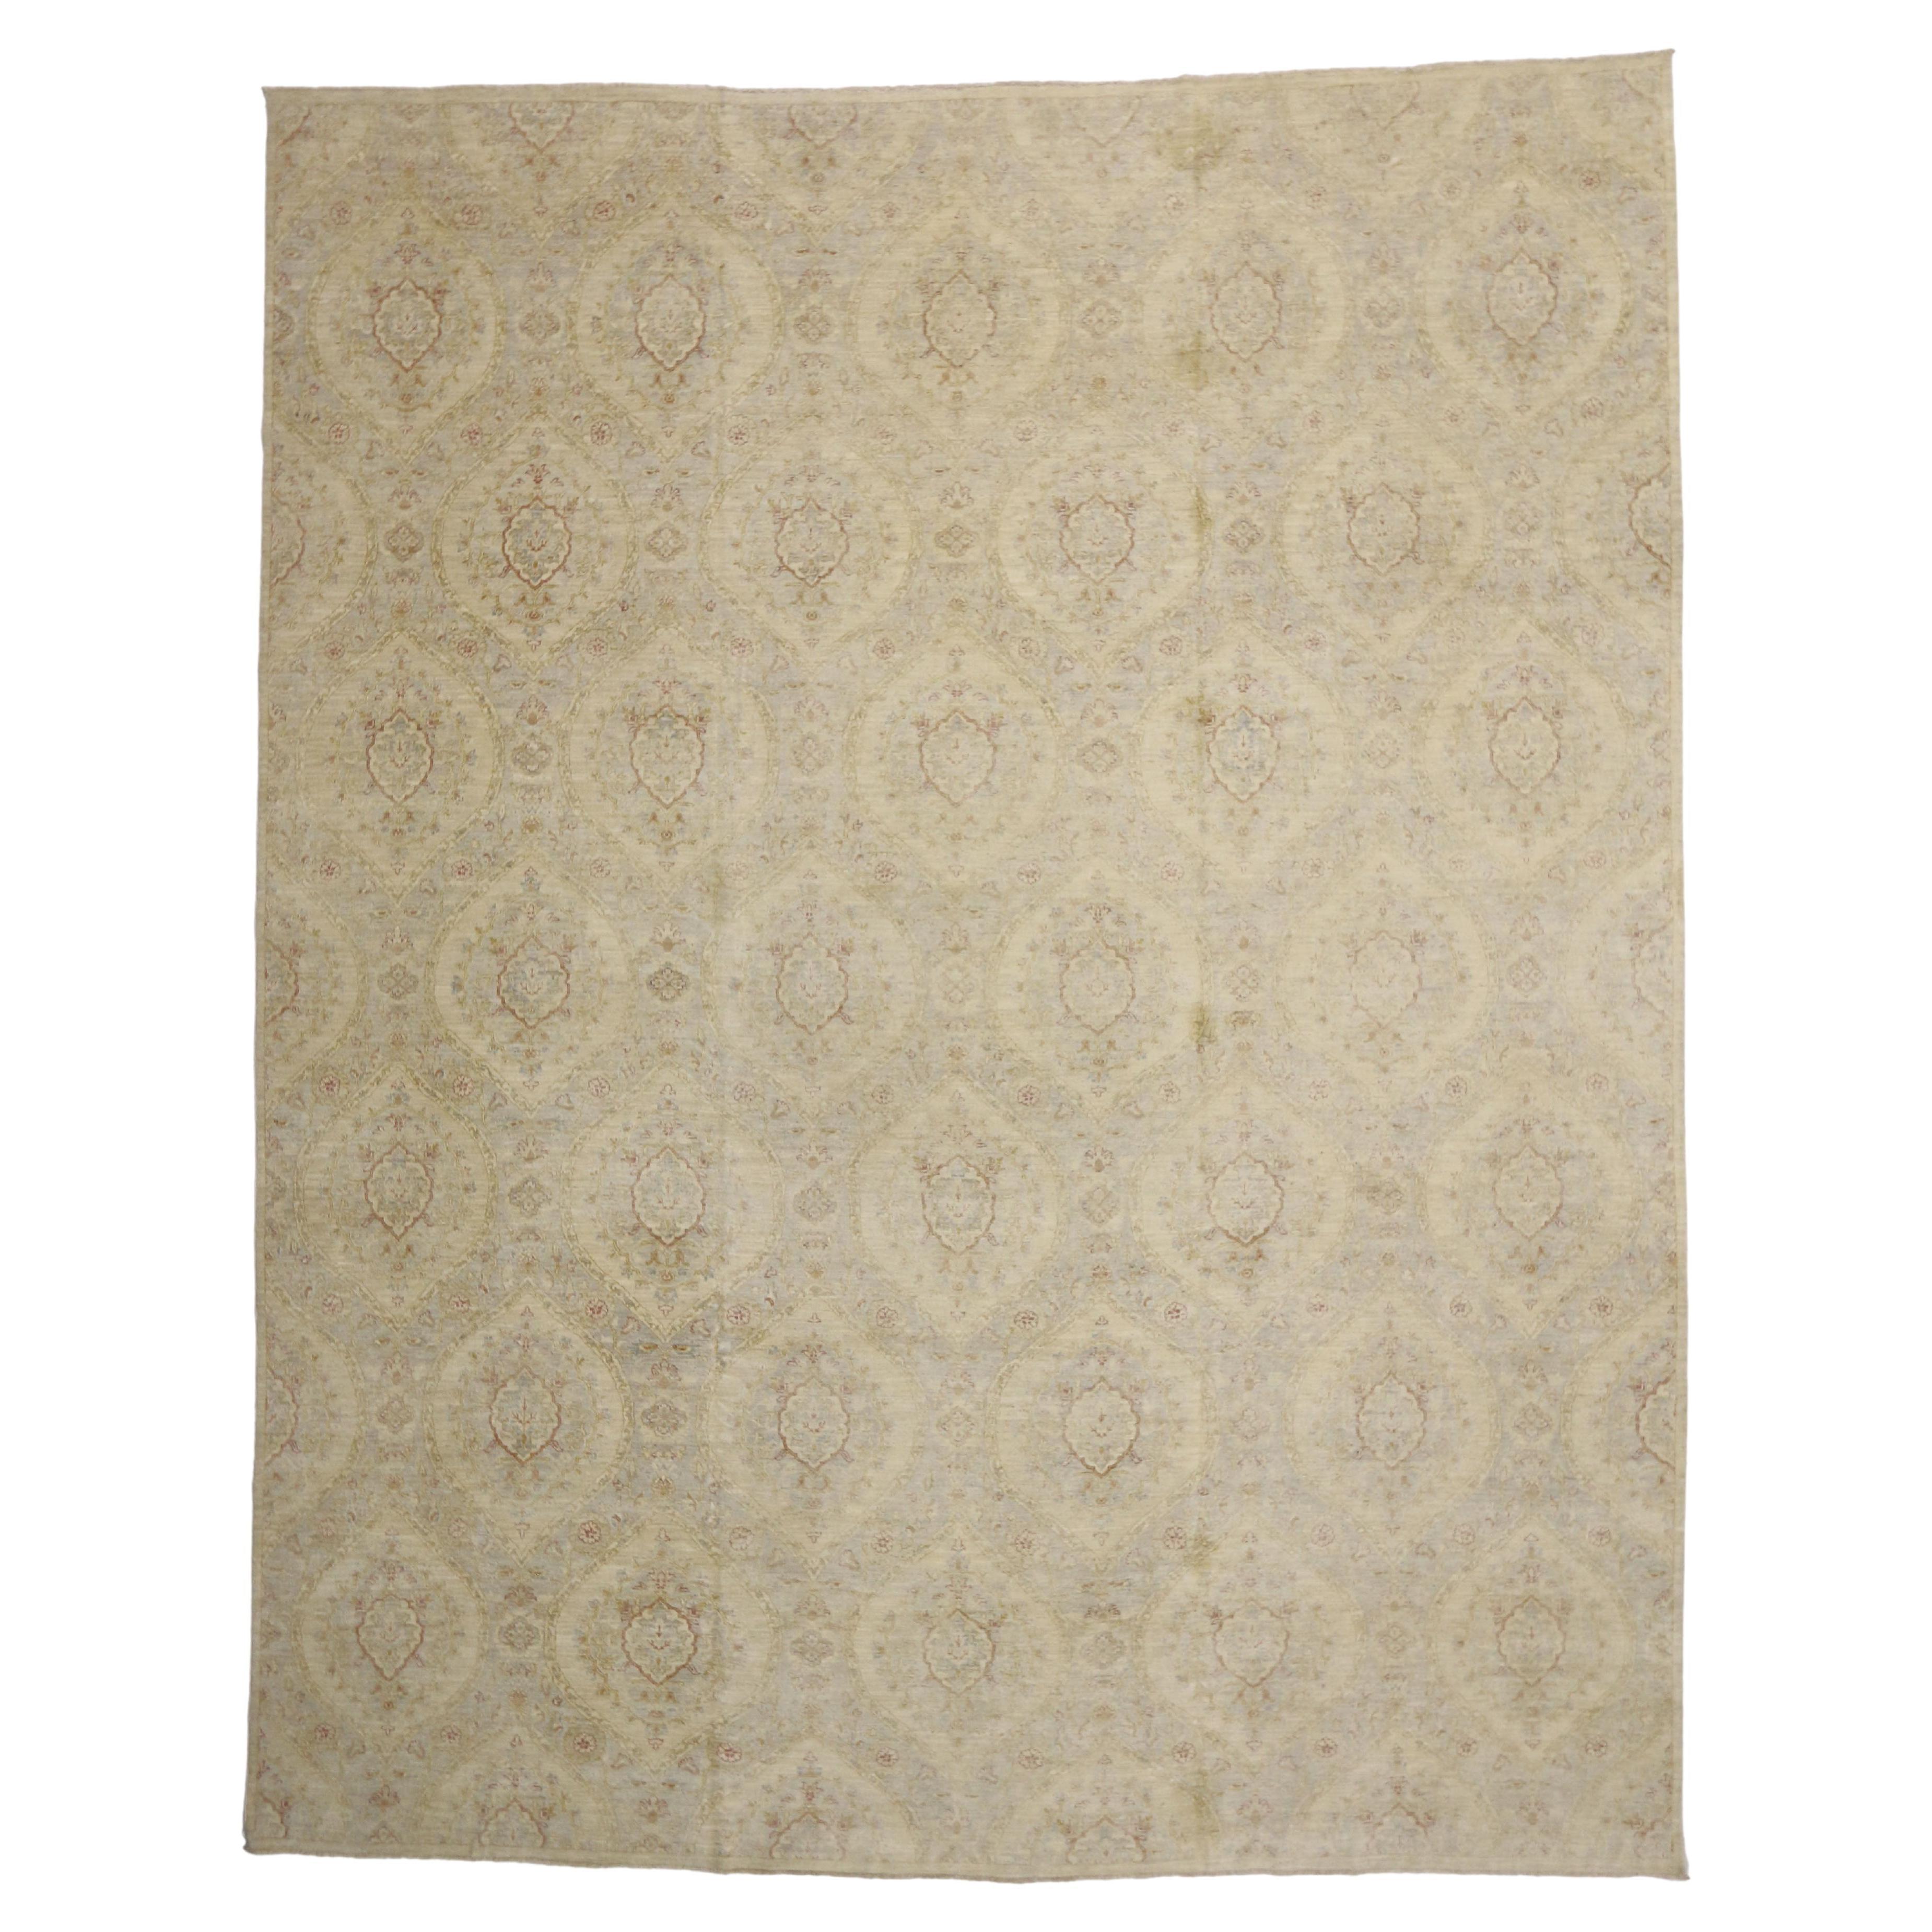 New Transitional Area Rug with French Provincial Georgian Style and Ogee Pattern